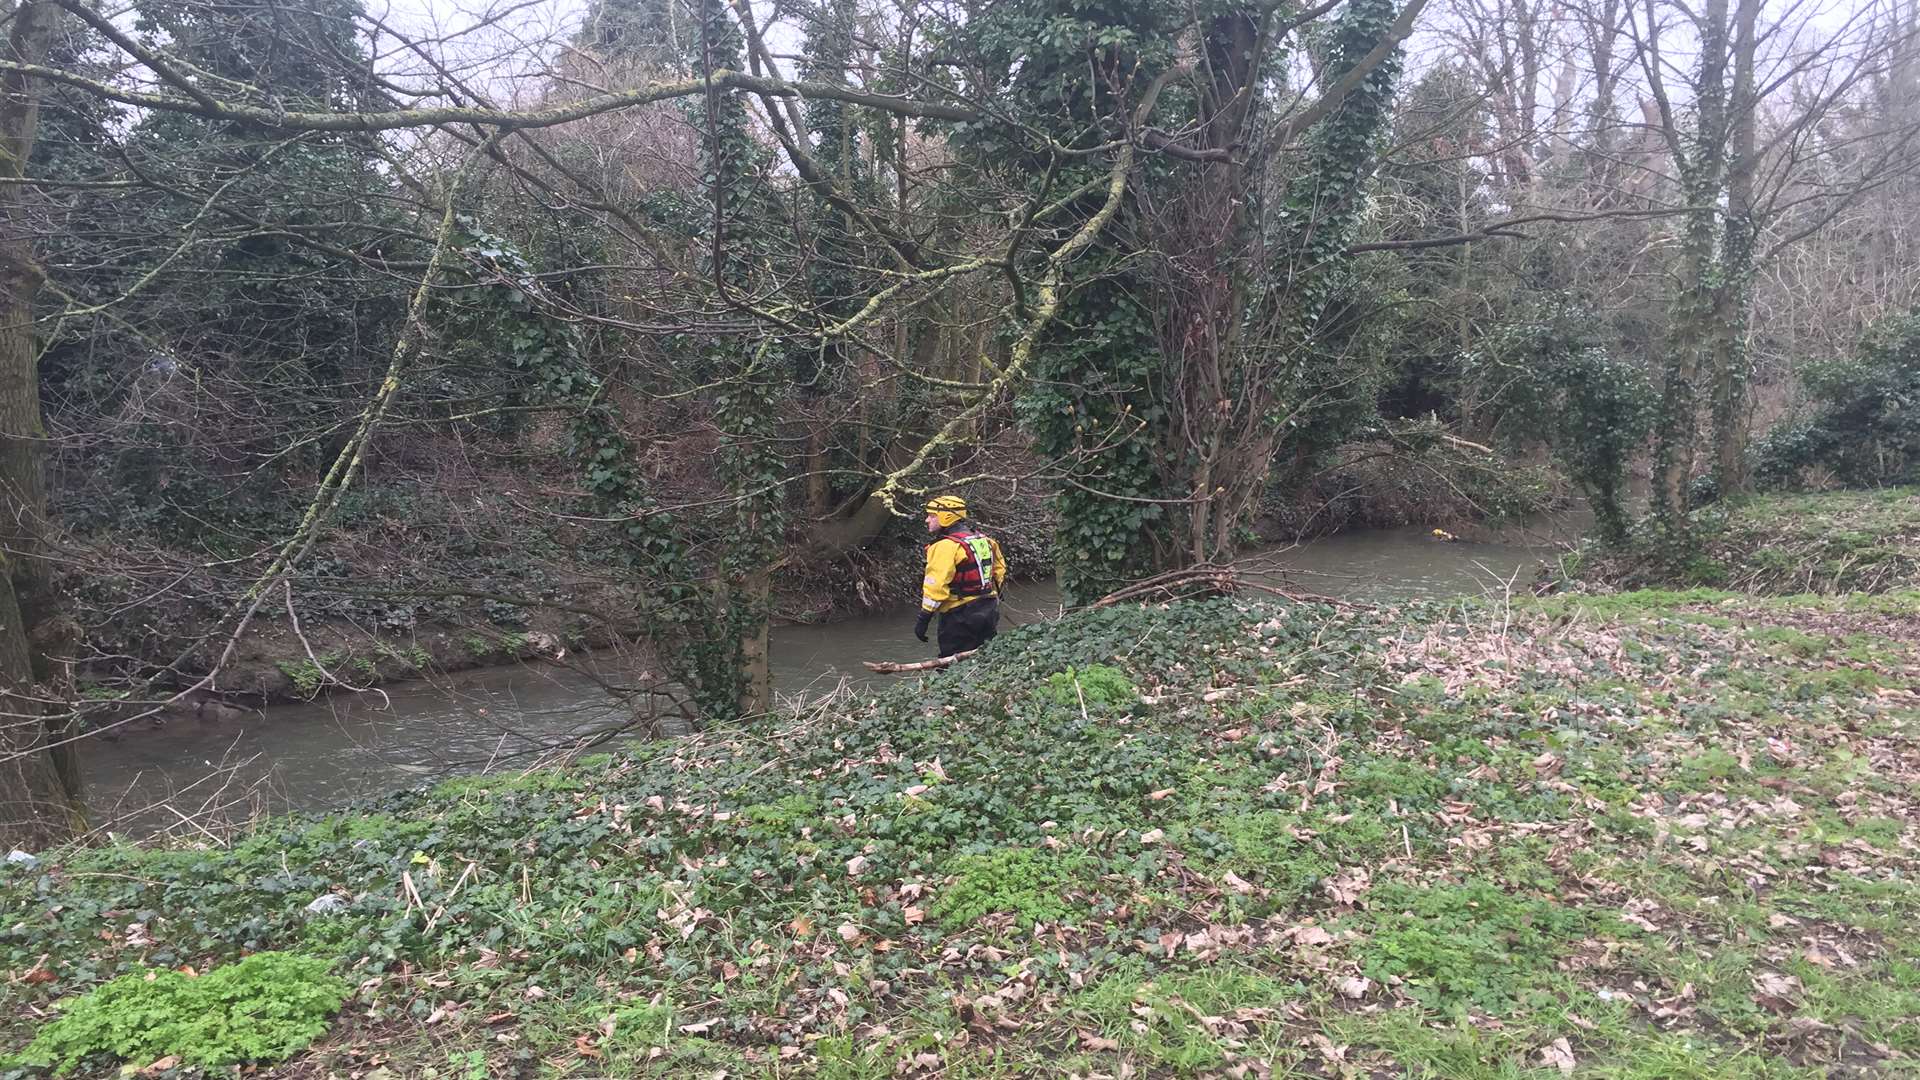 Divers were seen searching the river